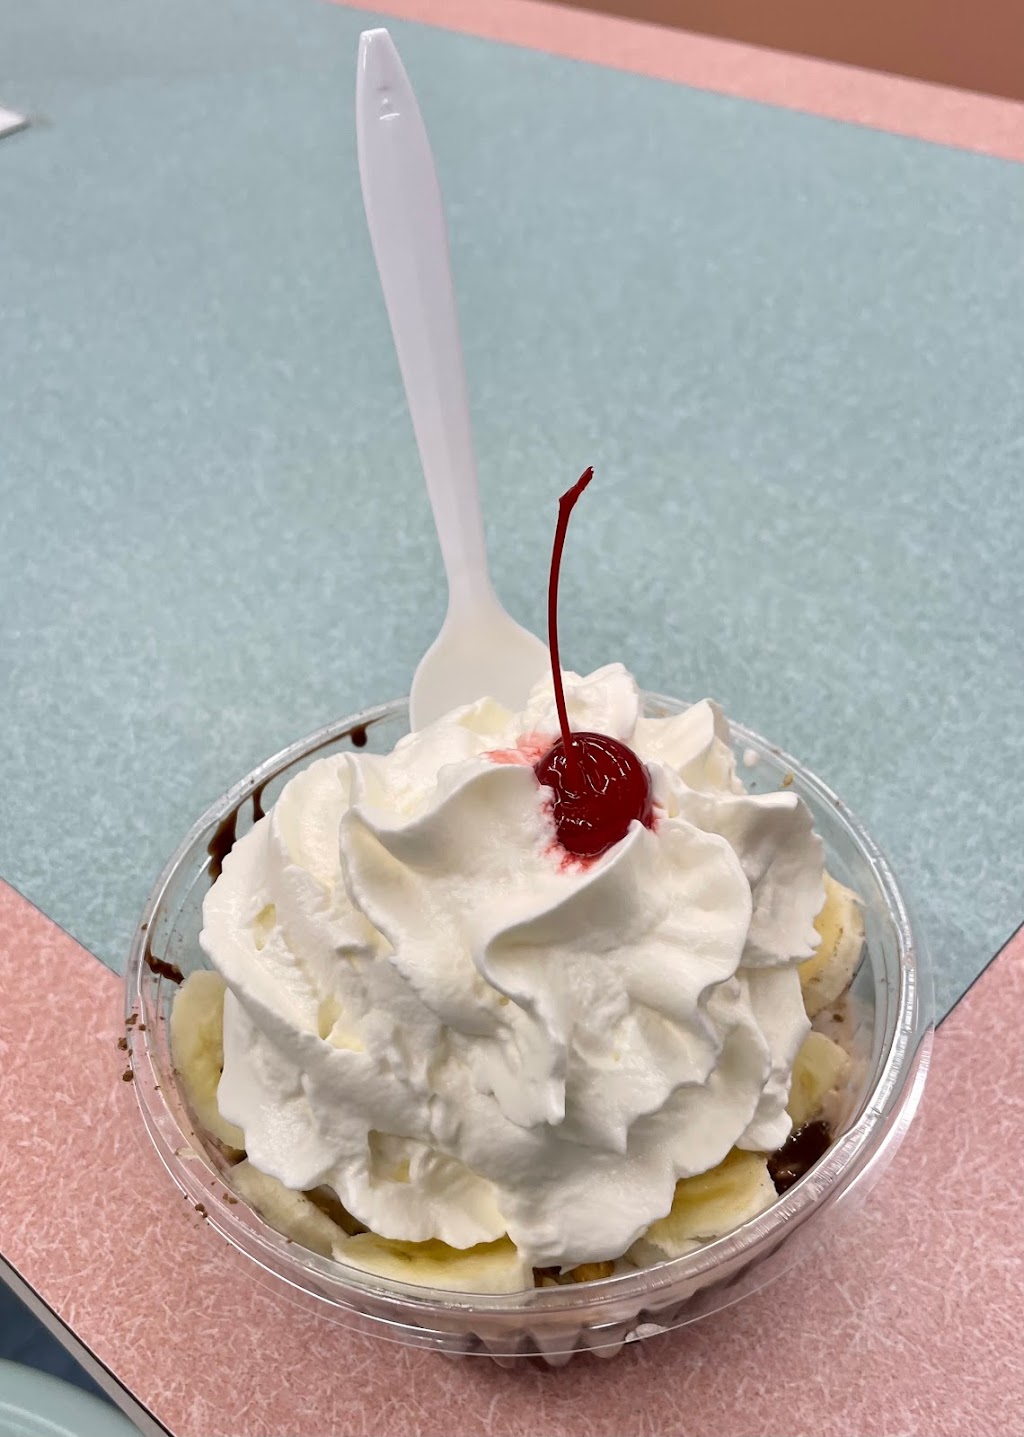 Big Dipper Ice Cream Parlor | 950 Central Ave, Dunkirk, NY 14048, USA | Phone: (716) 366-0616